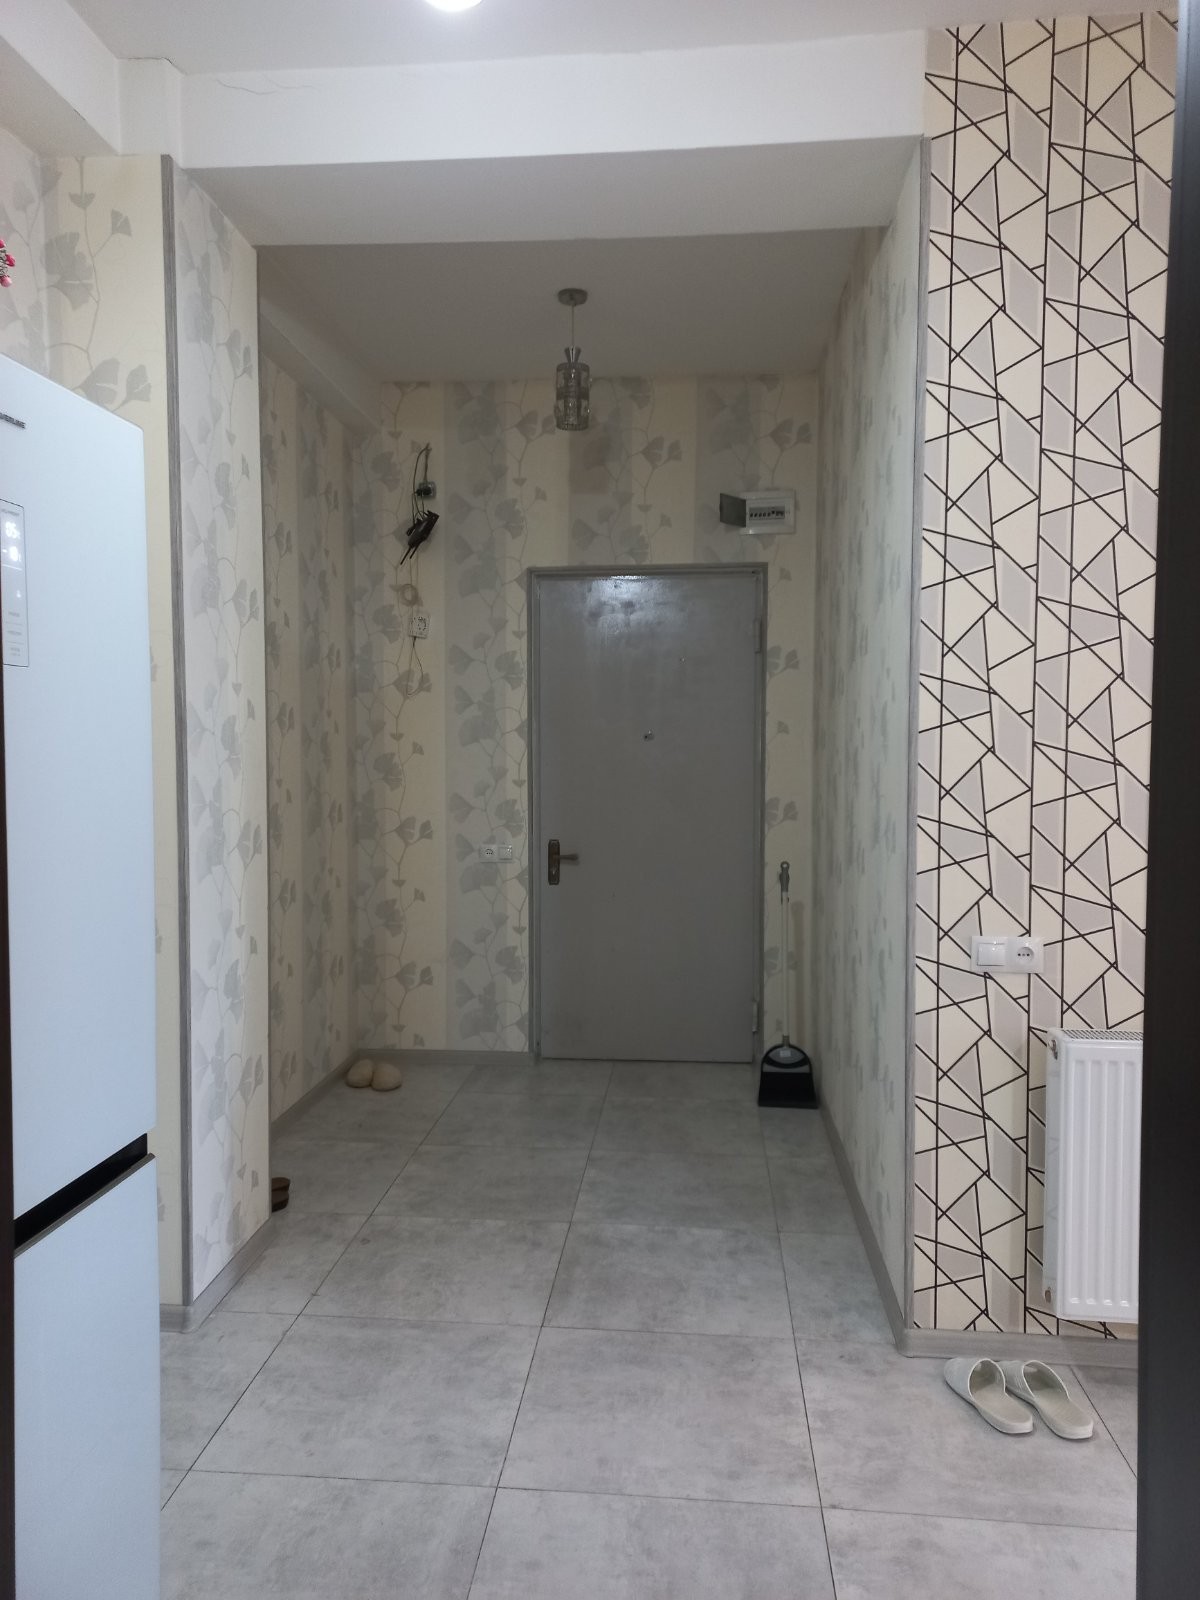 For sale Block of flats in Gldani district